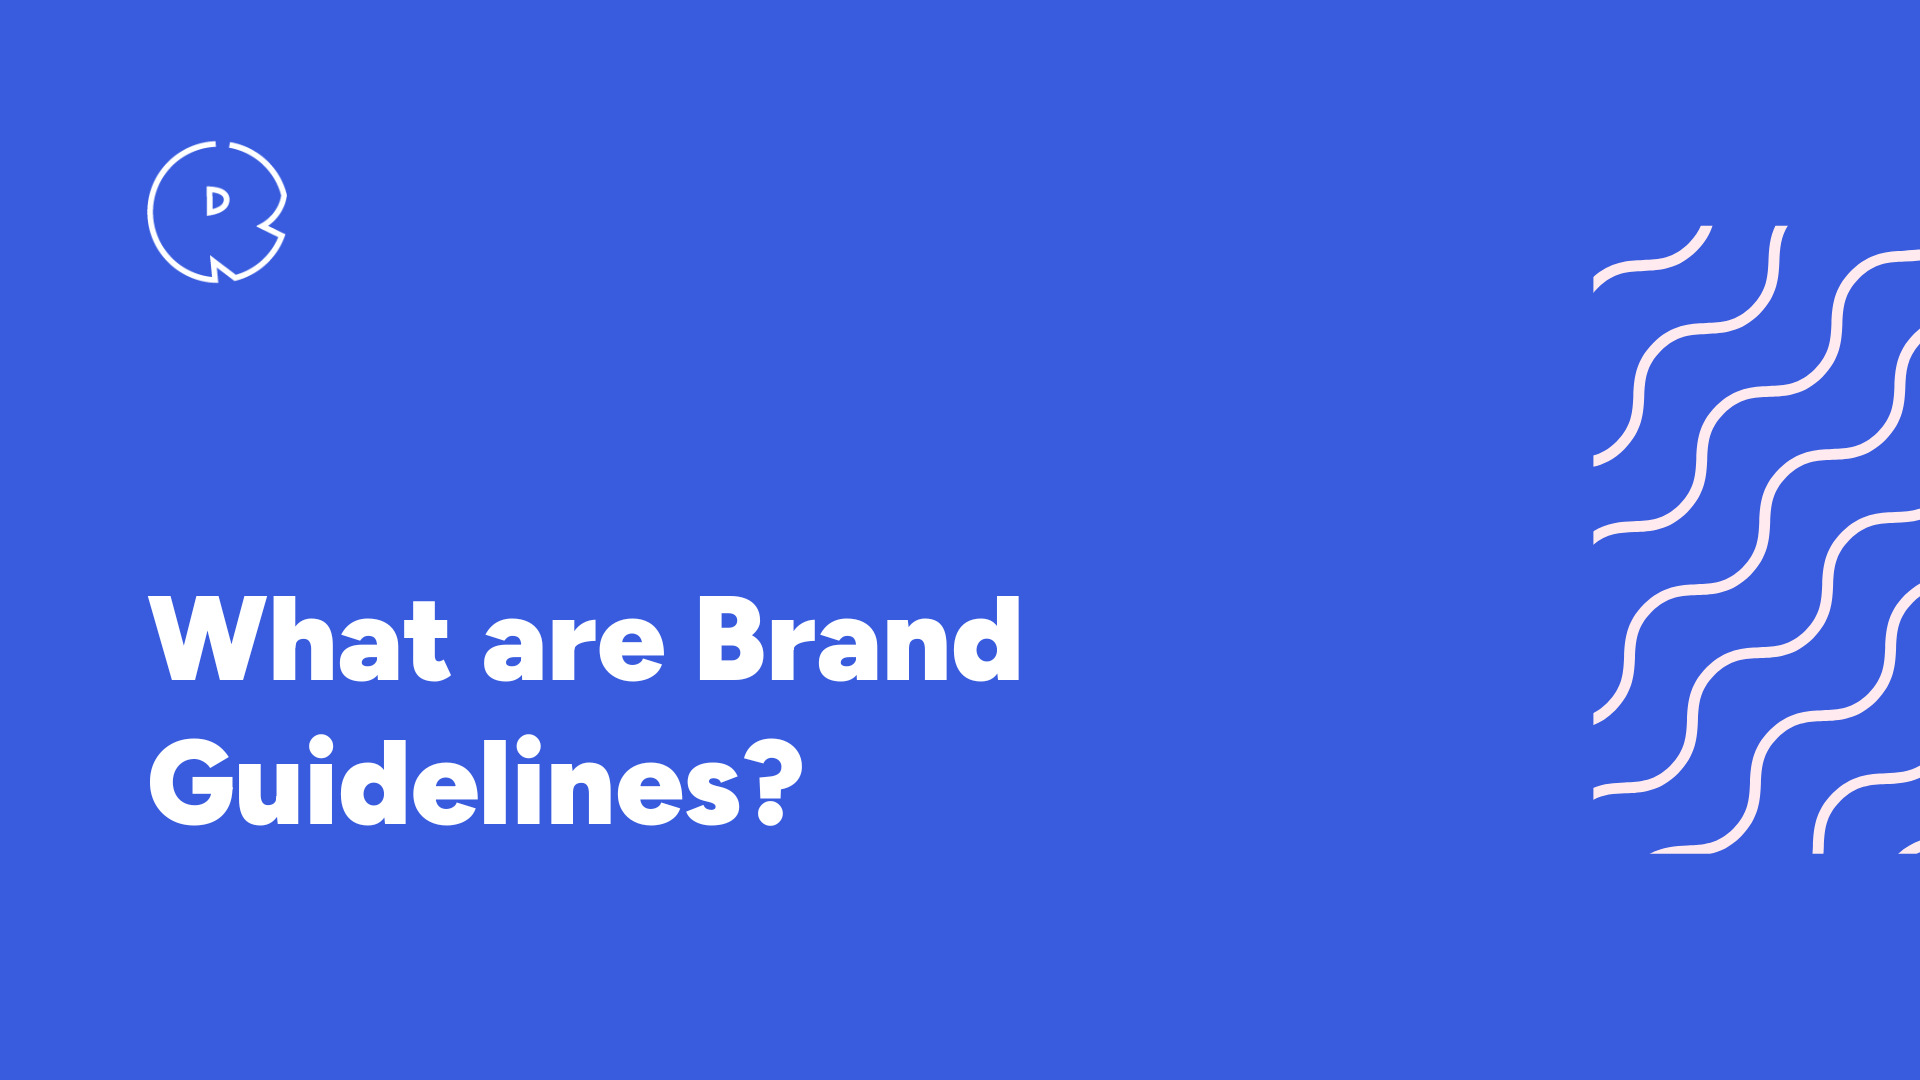 What are Brand Guidelines?